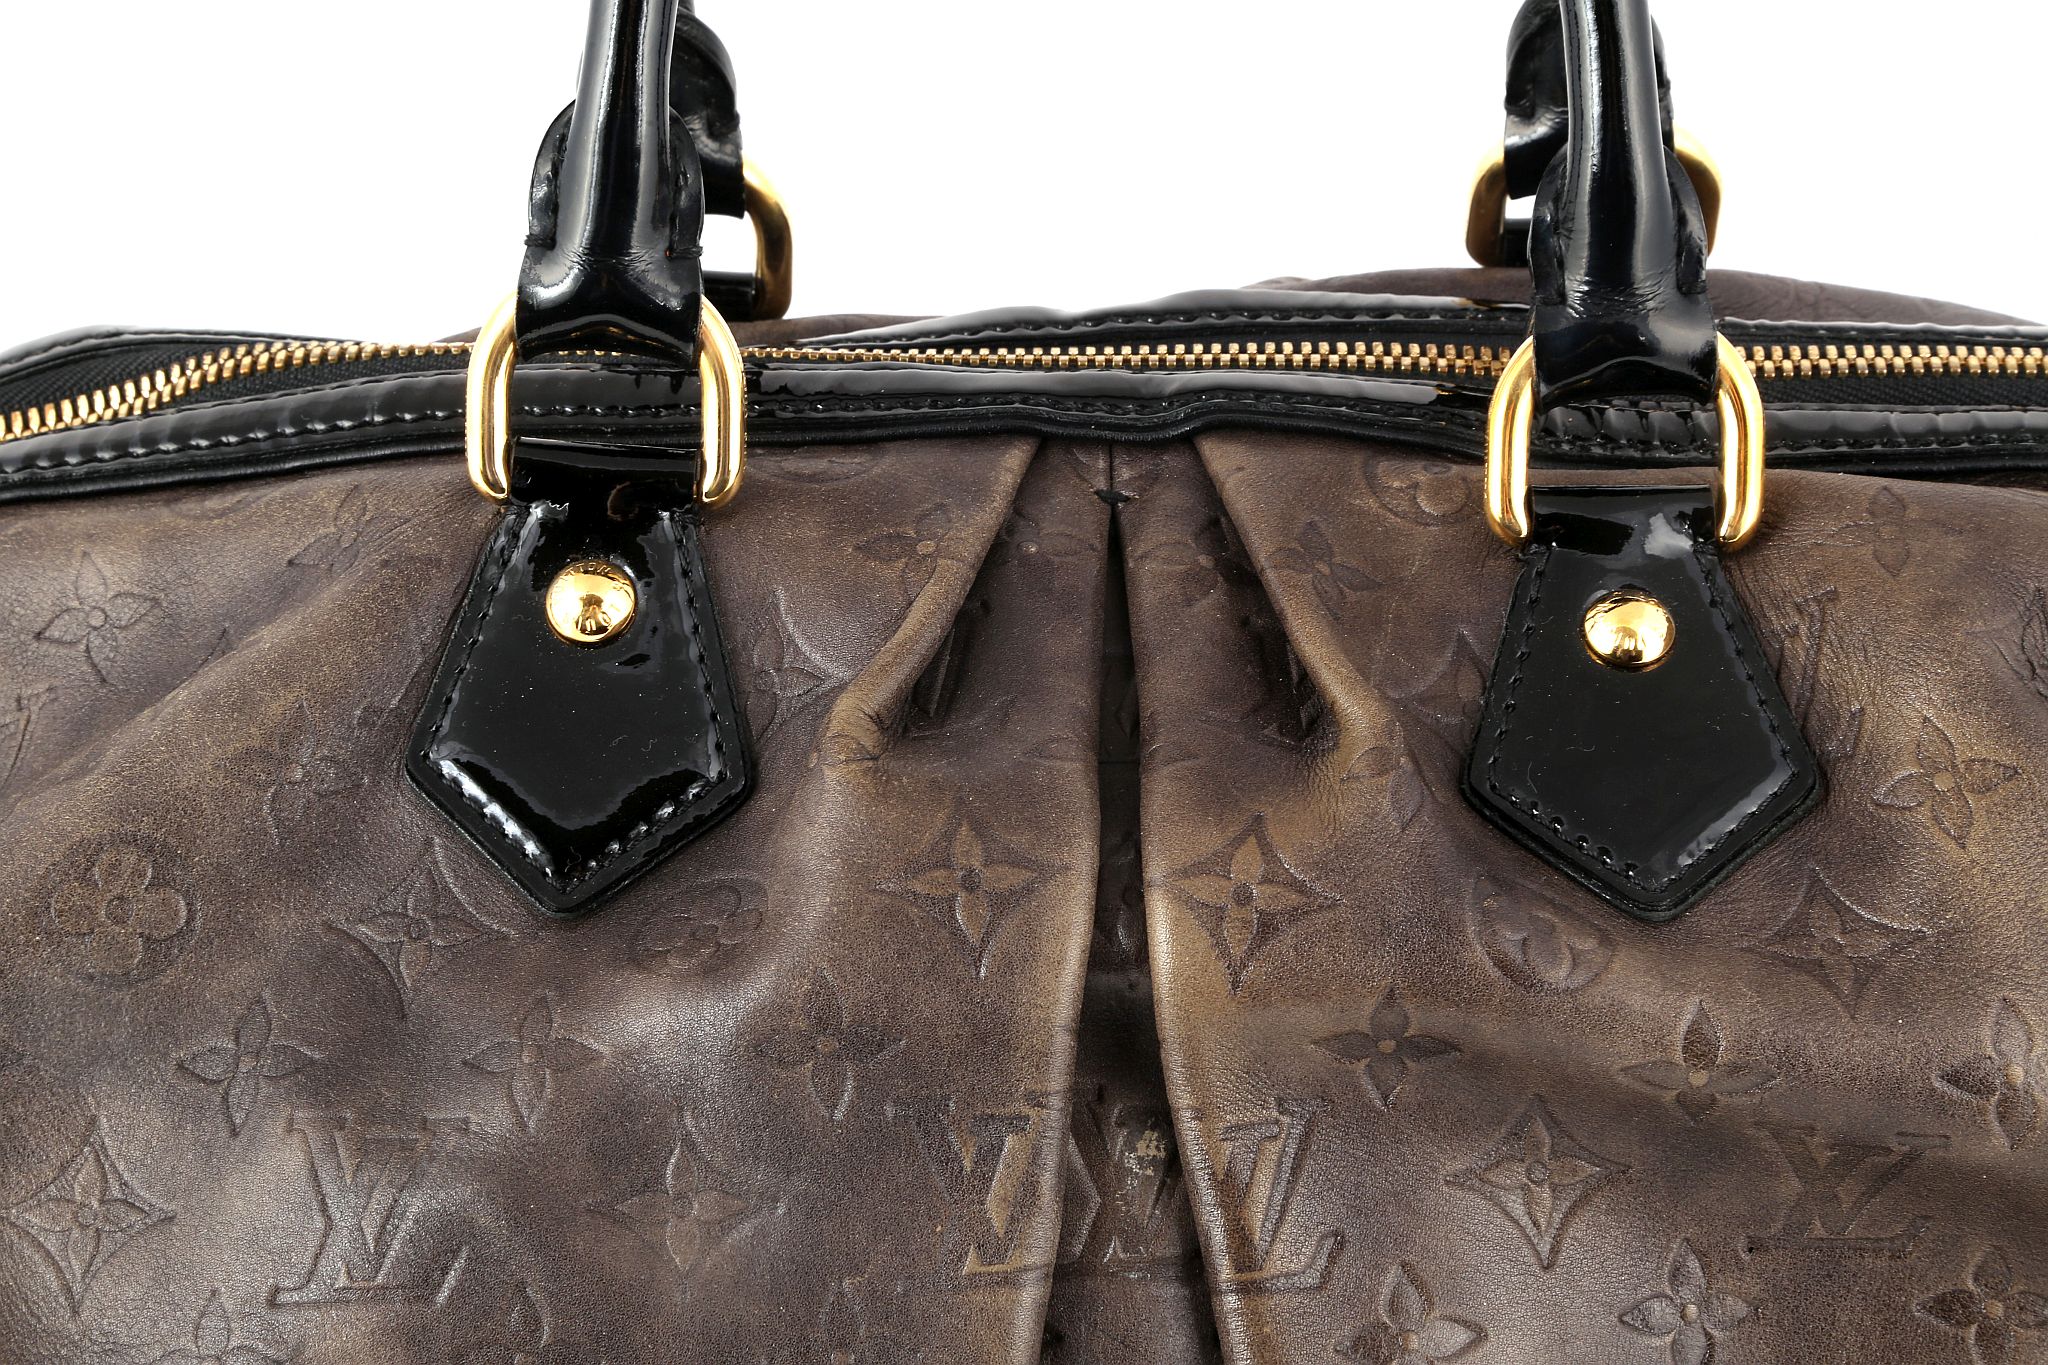 LOUIS VUITTON STEPHEN BOSTON HANDBAG, date code for 2006, embossed monogram leather with black - Image 4 of 12